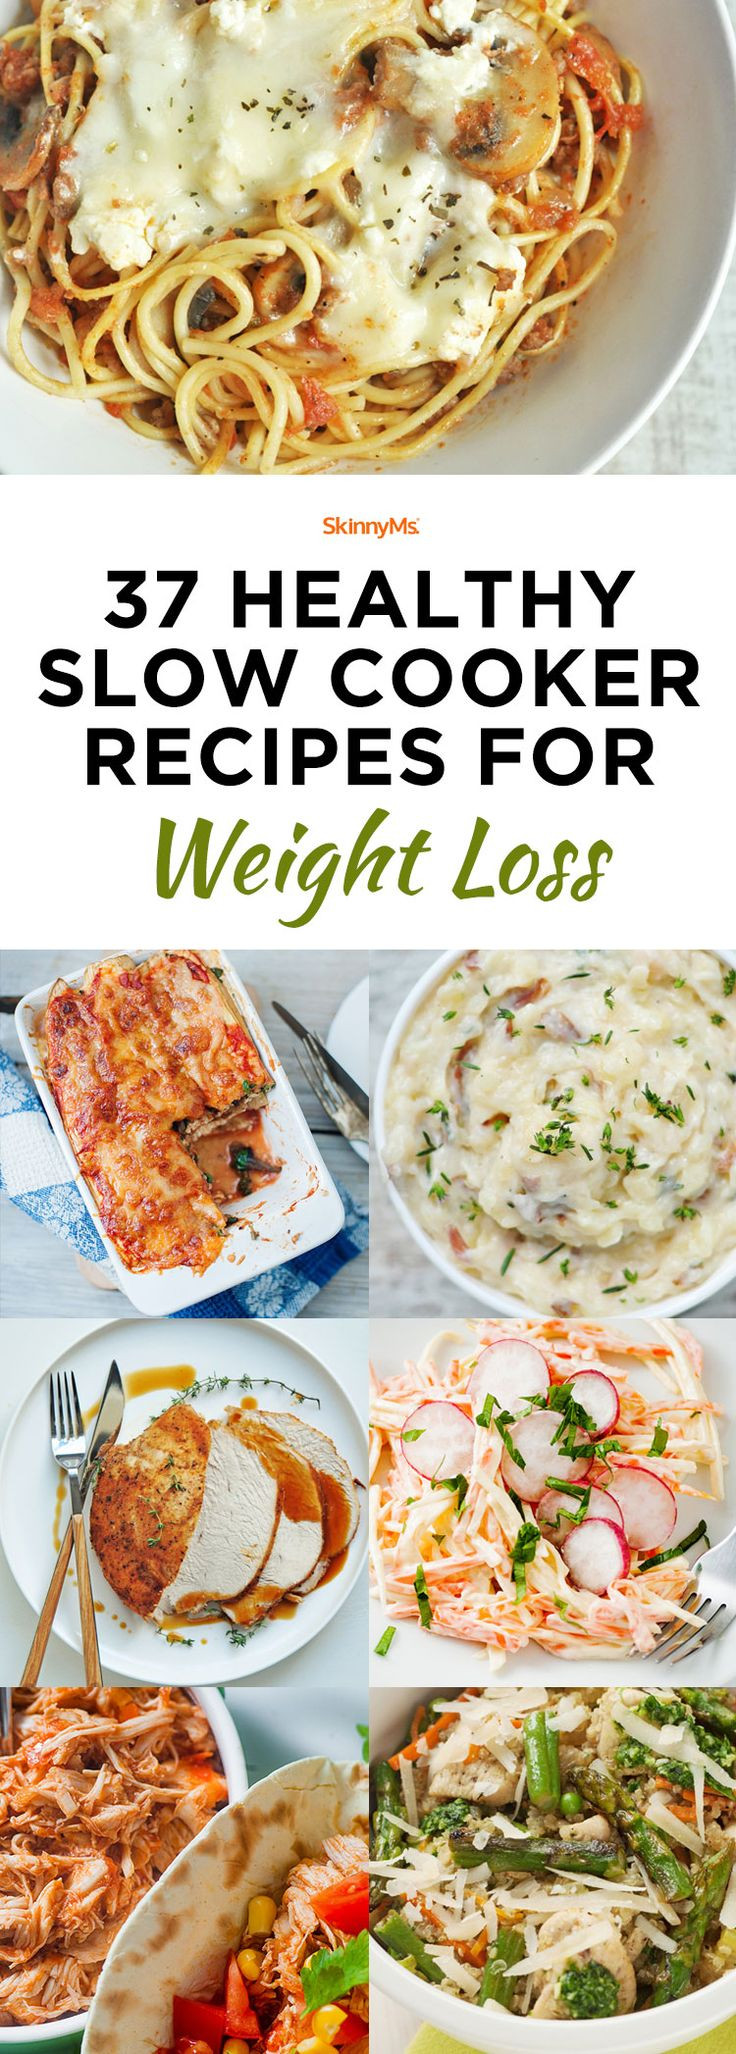 Weight Loss Slow Cooker Recipes
 best Skinny Ms Eats images on Pinterest